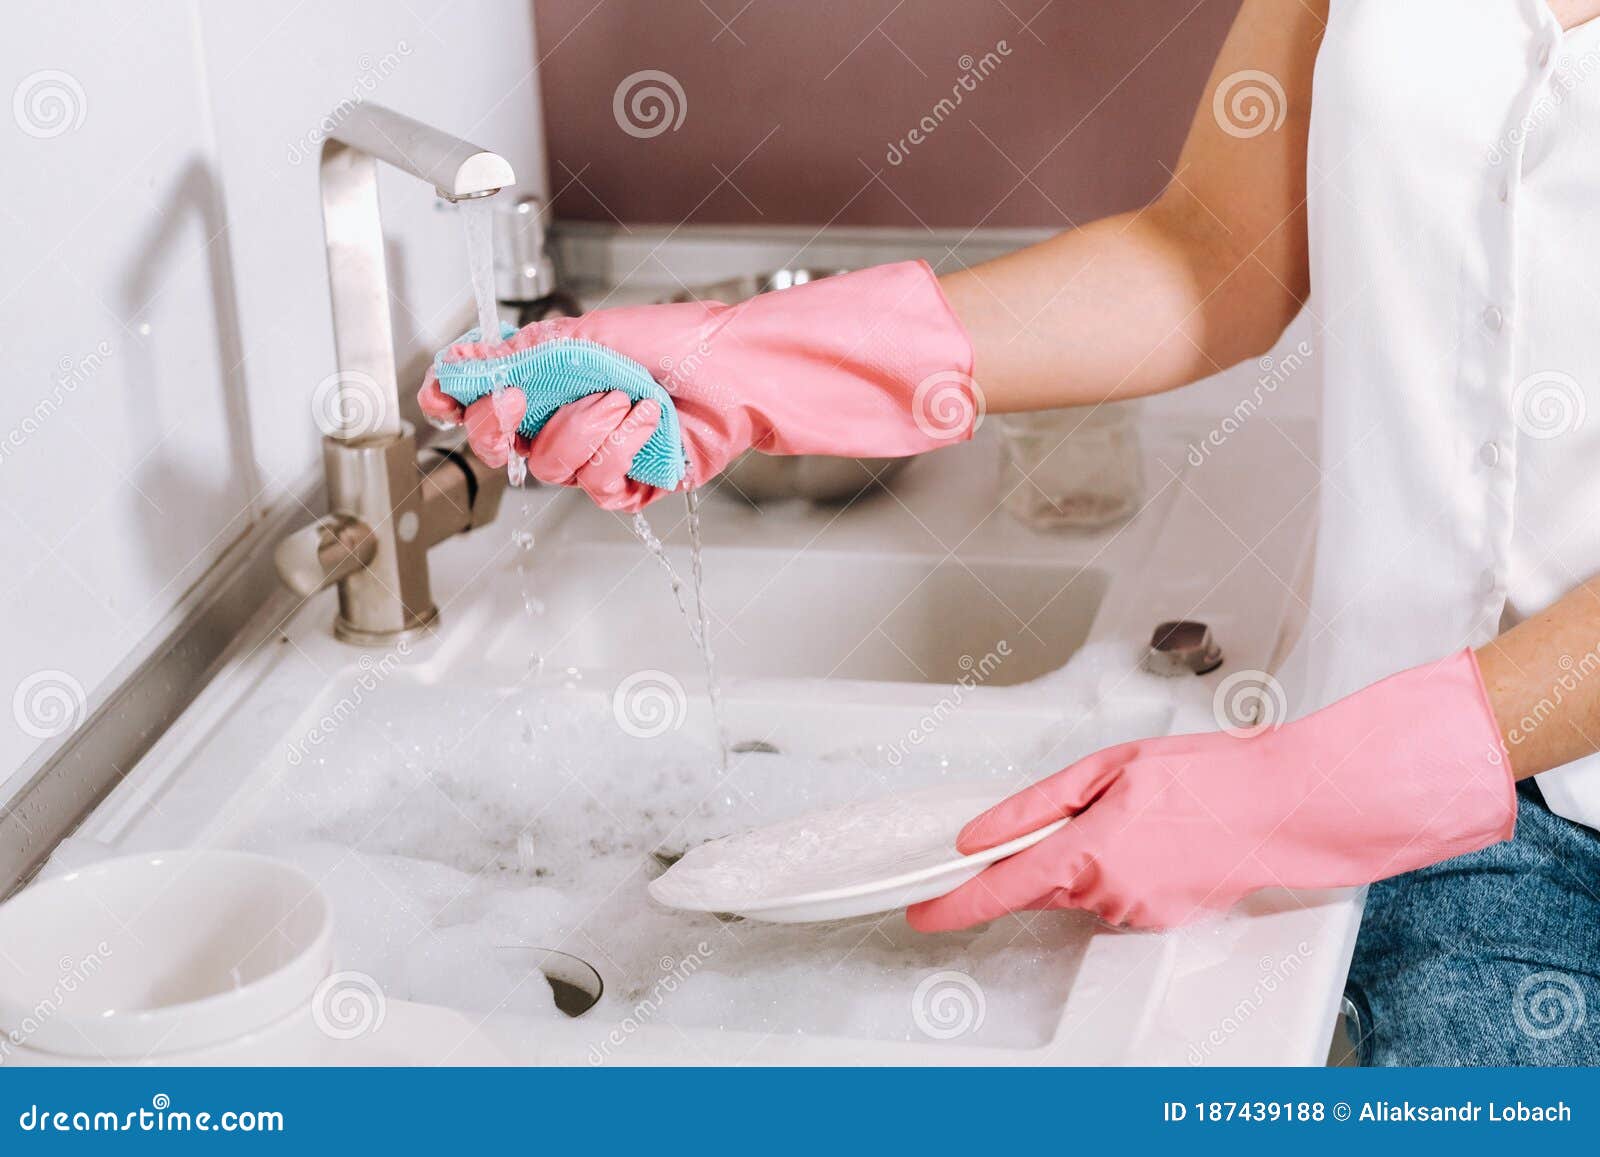 Housewife Girl in Pink Gloves Washes Dishes by Hand in the Sink w image